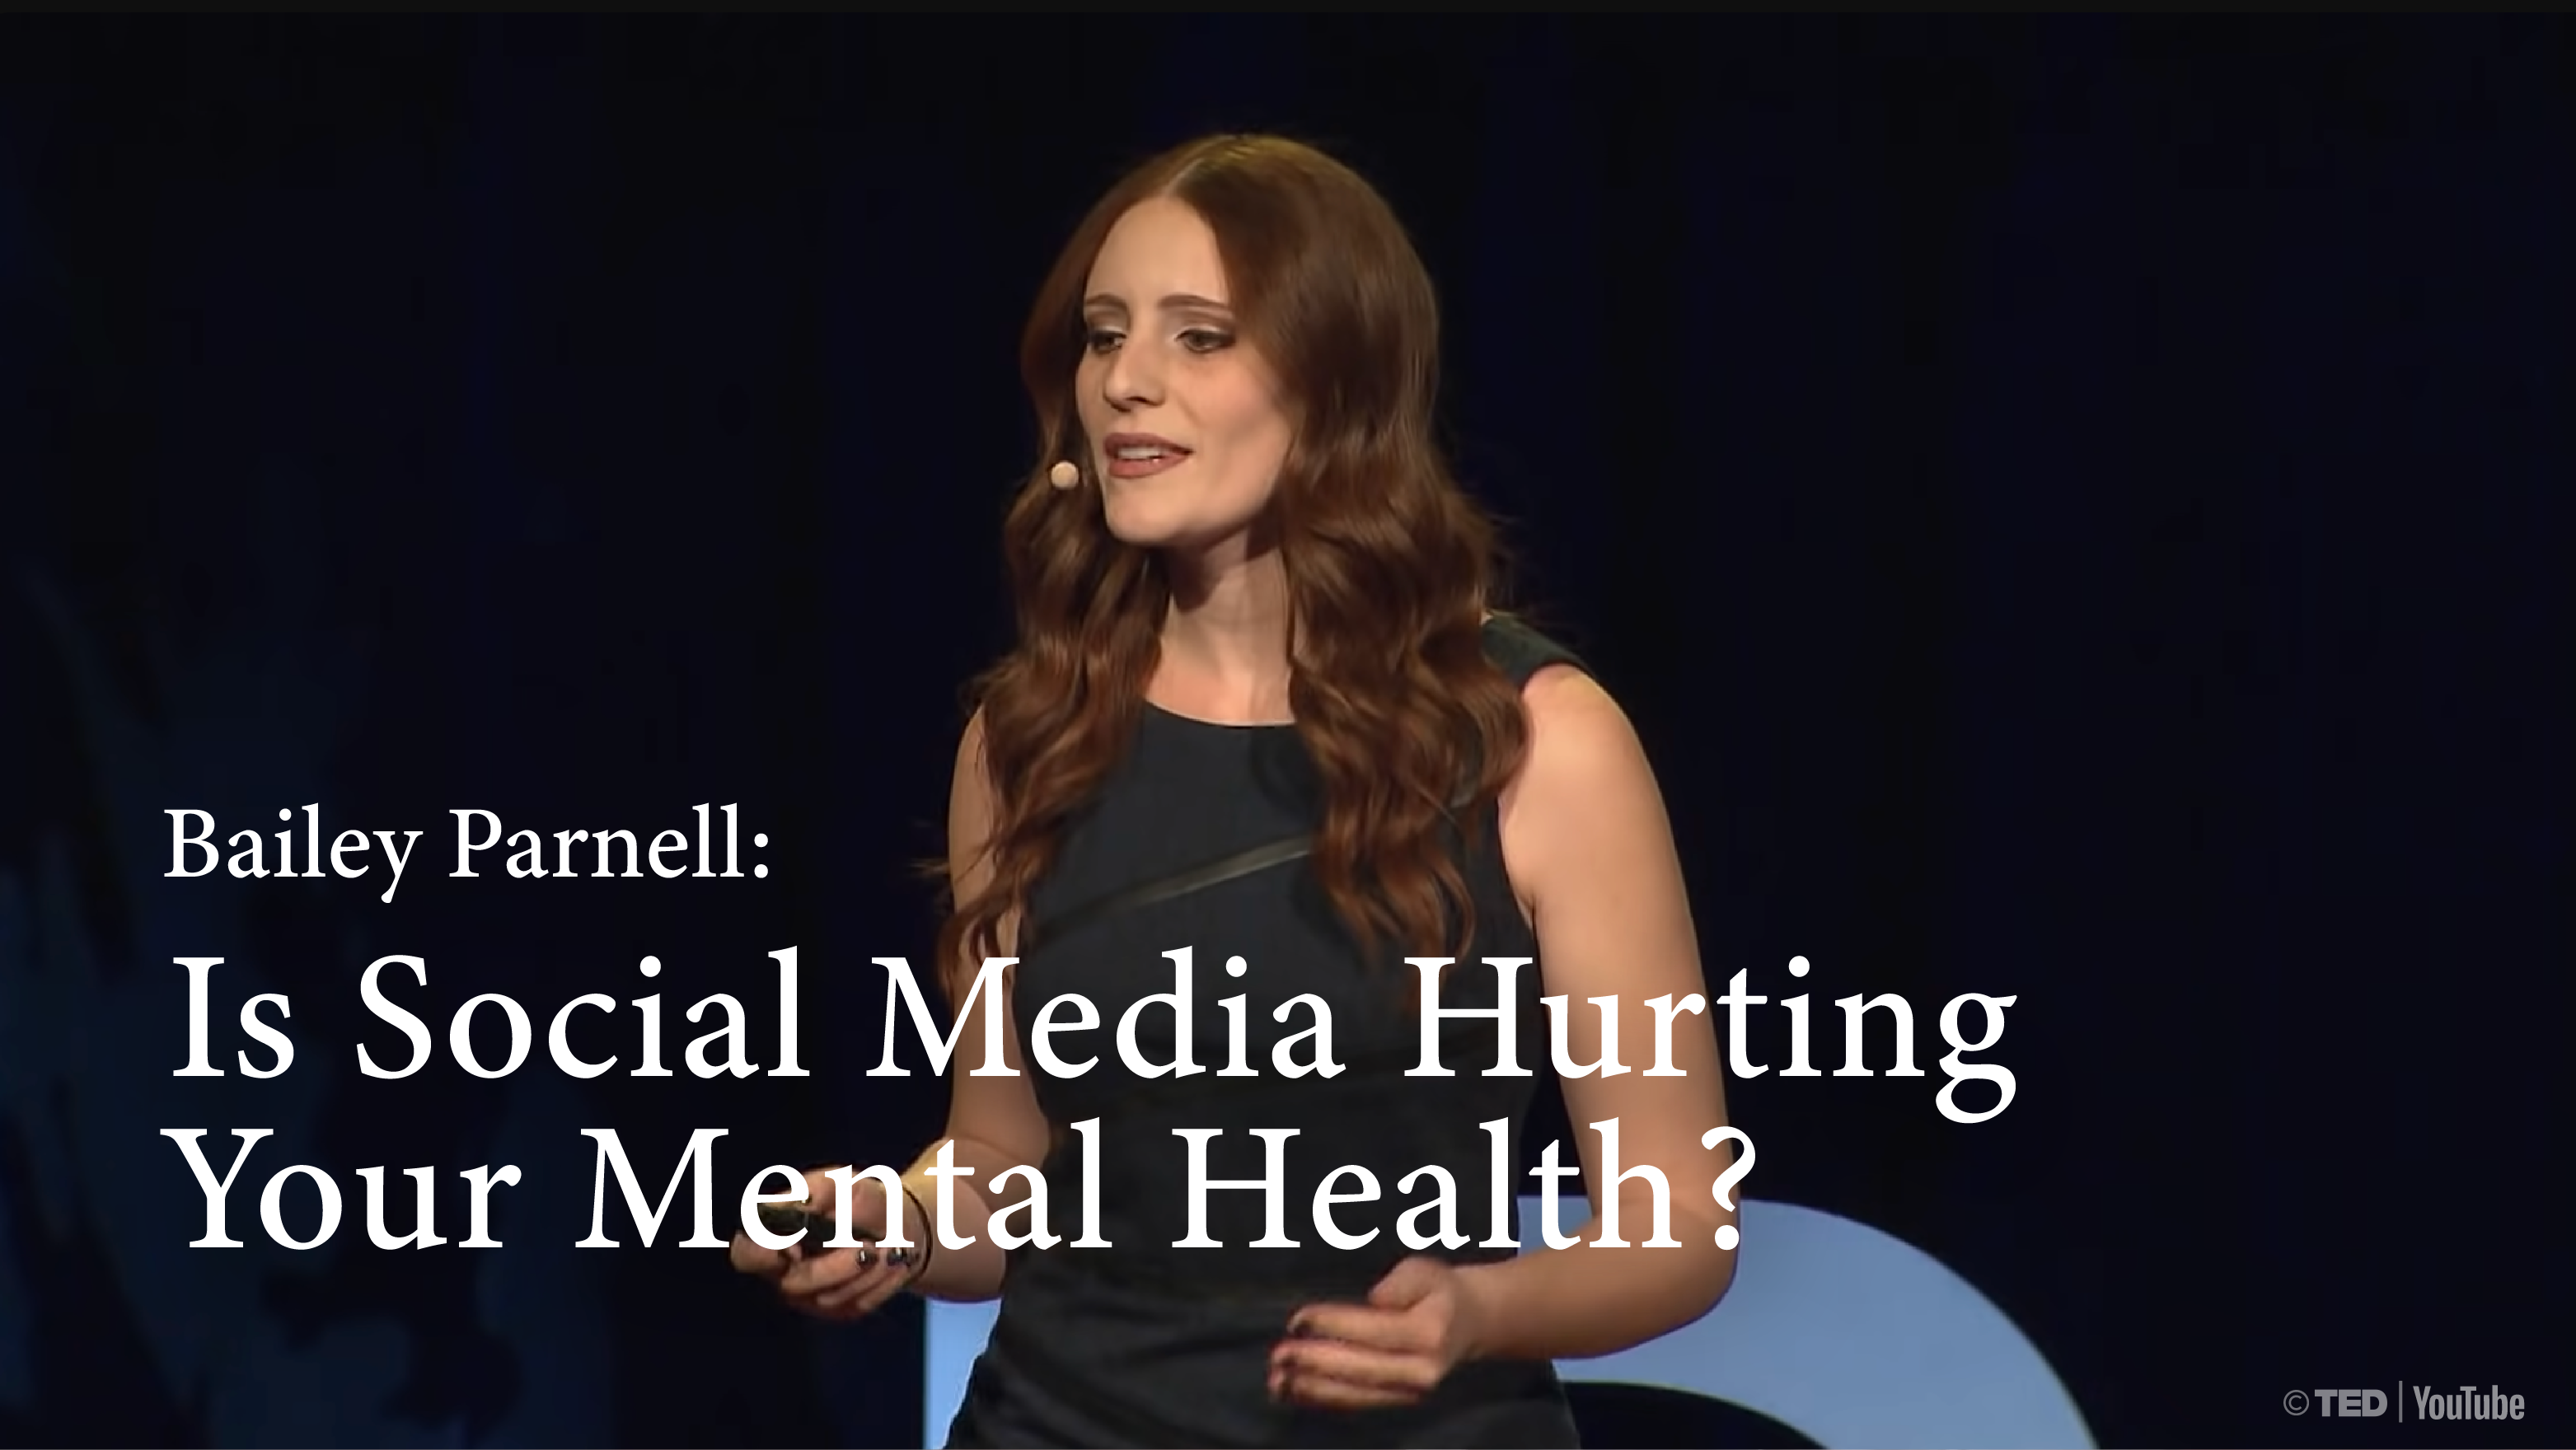 [C+] Is Social Media Hurting Your Mental Health? | Bailey Parnell [PRACTICE]